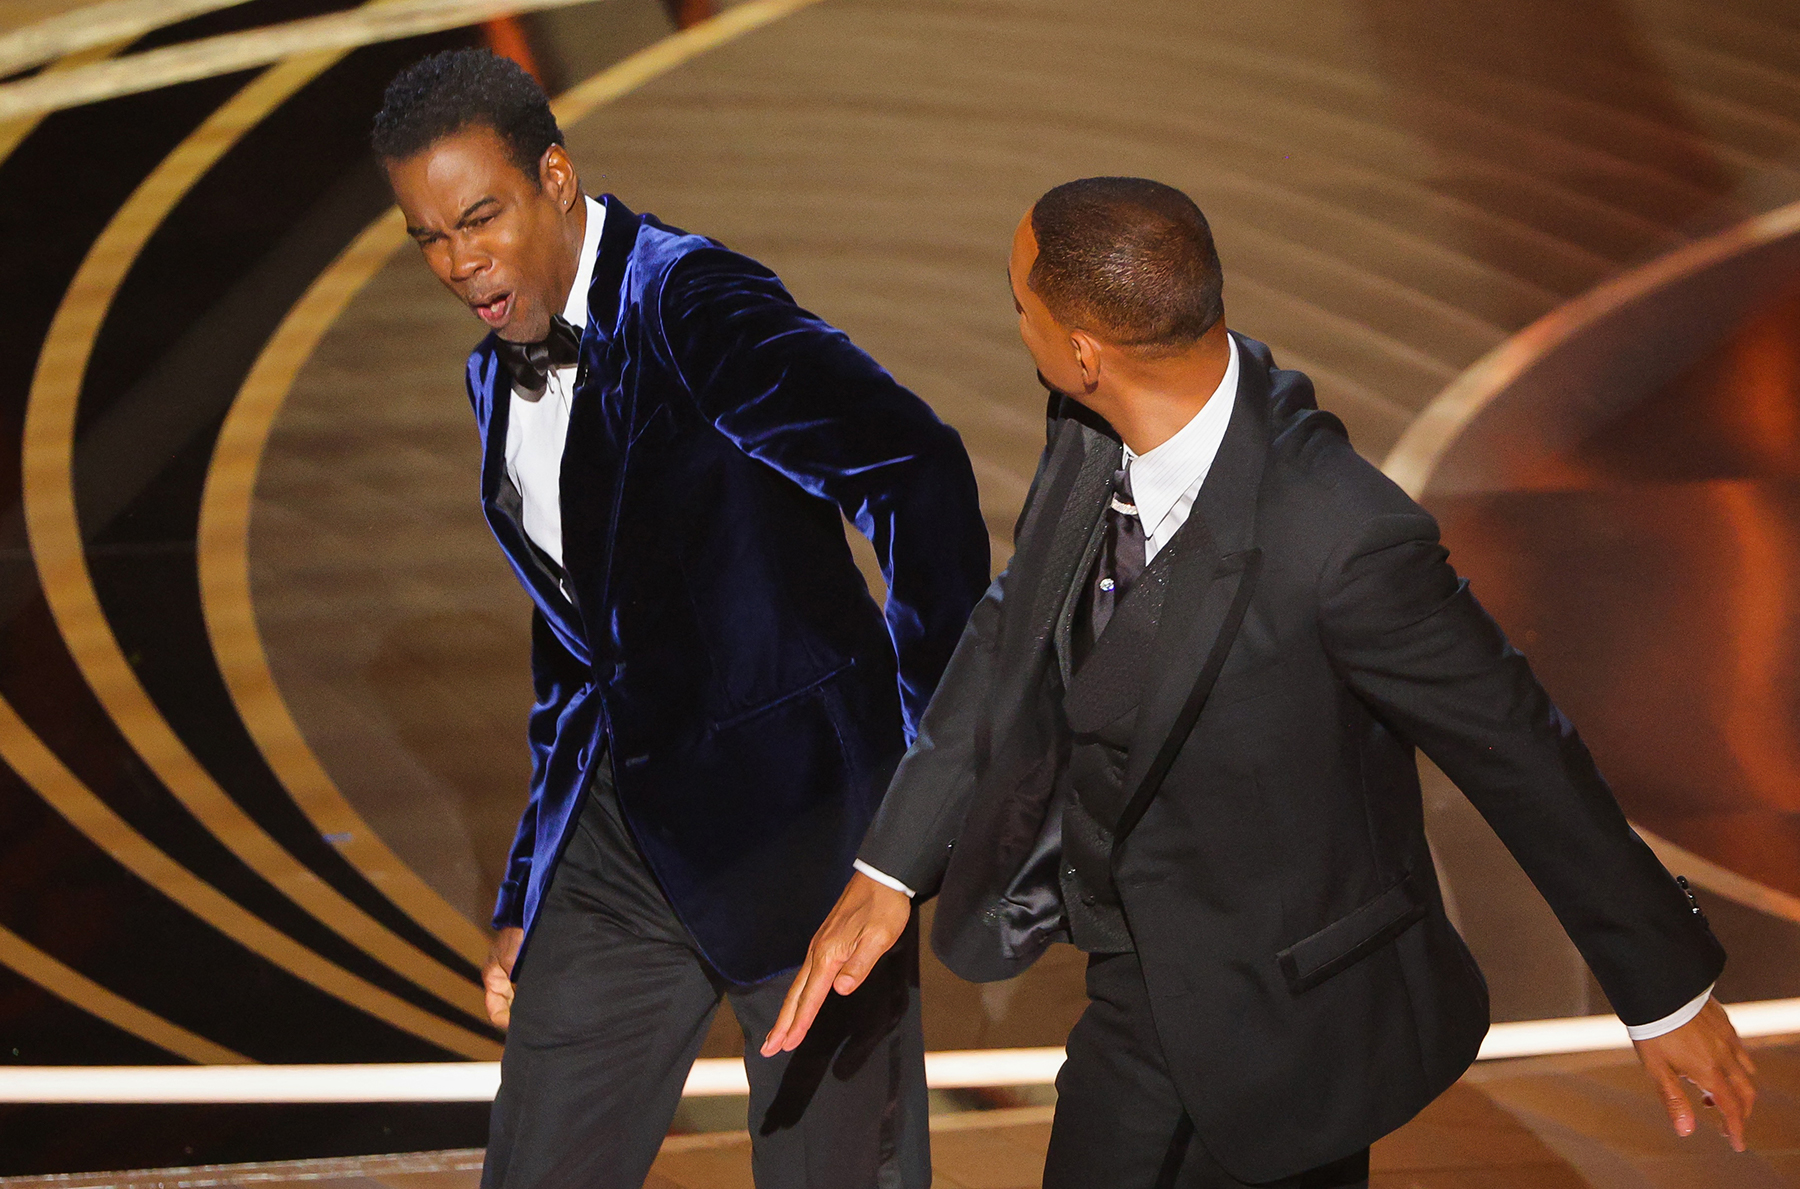 Will Smith attacks Chris Rock at the 2022 Oscars